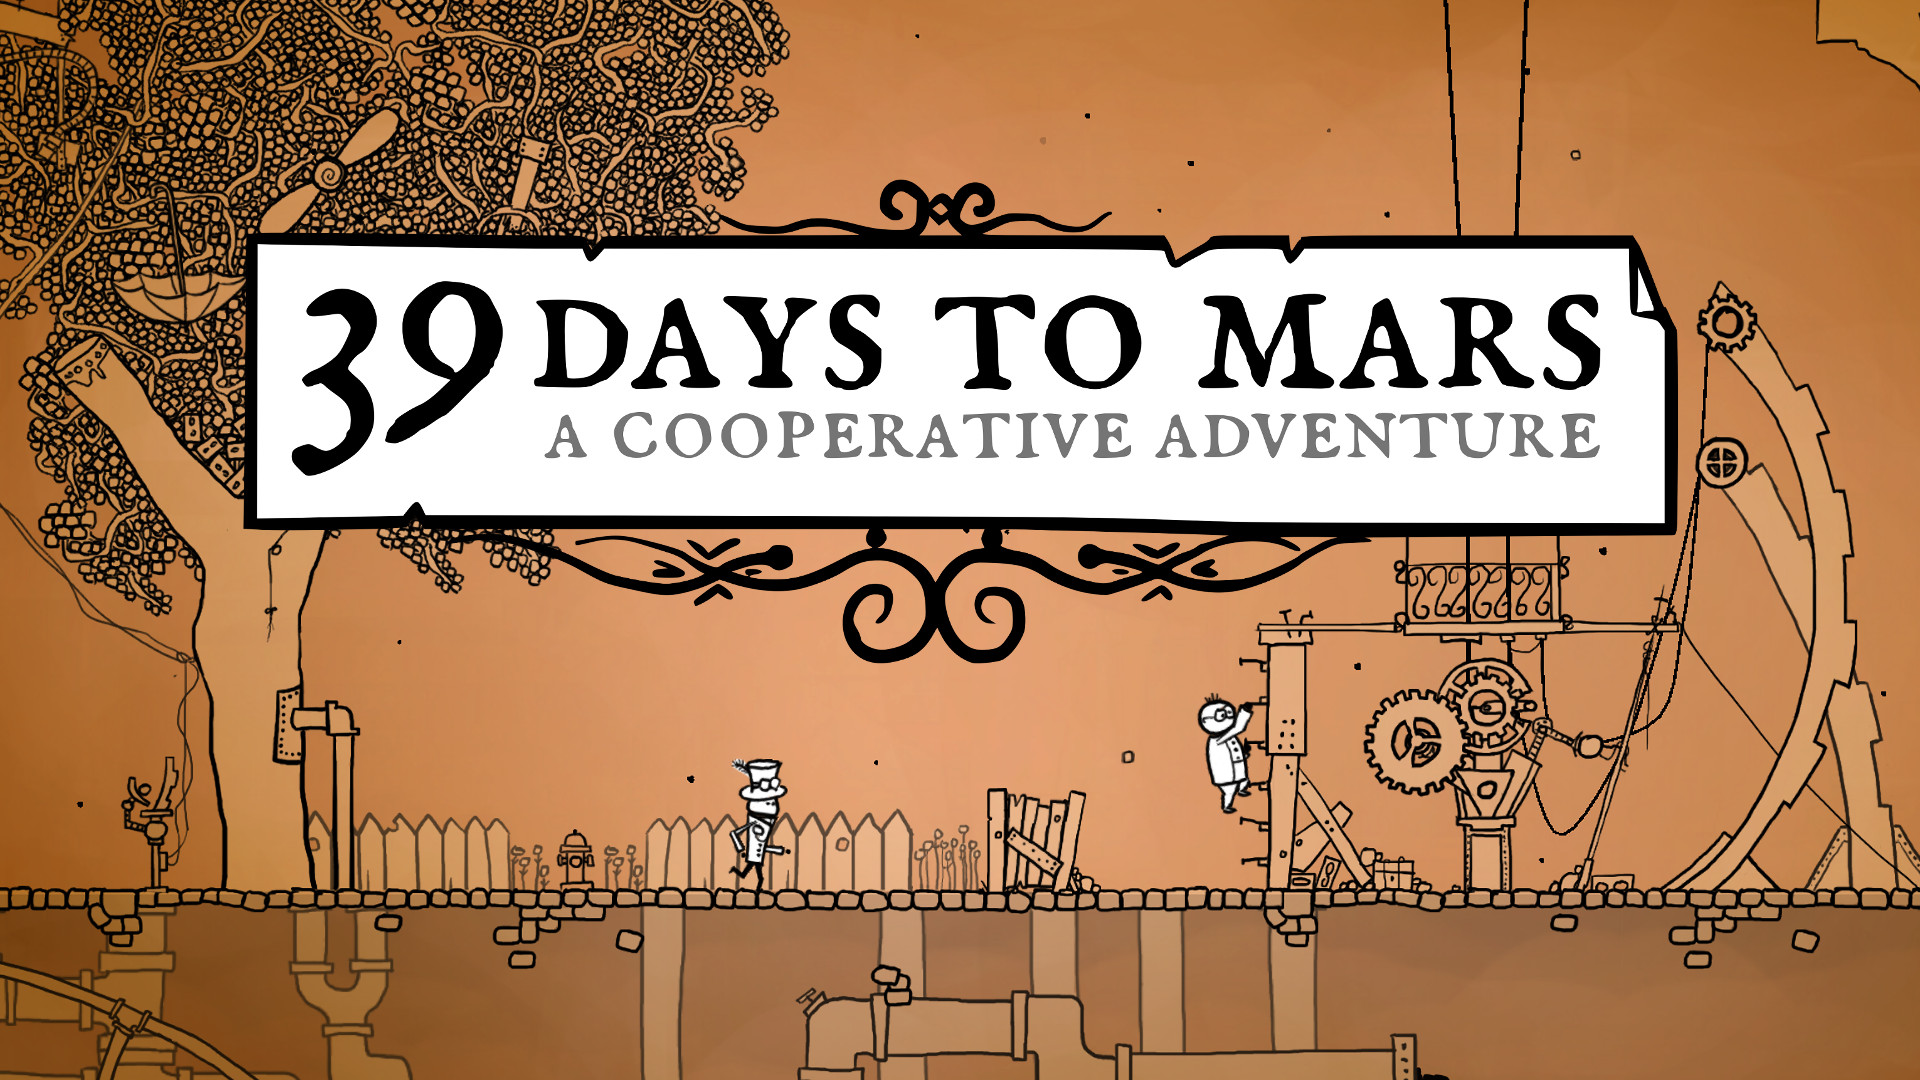 39 Days to Mars: A Cooperative Adventure